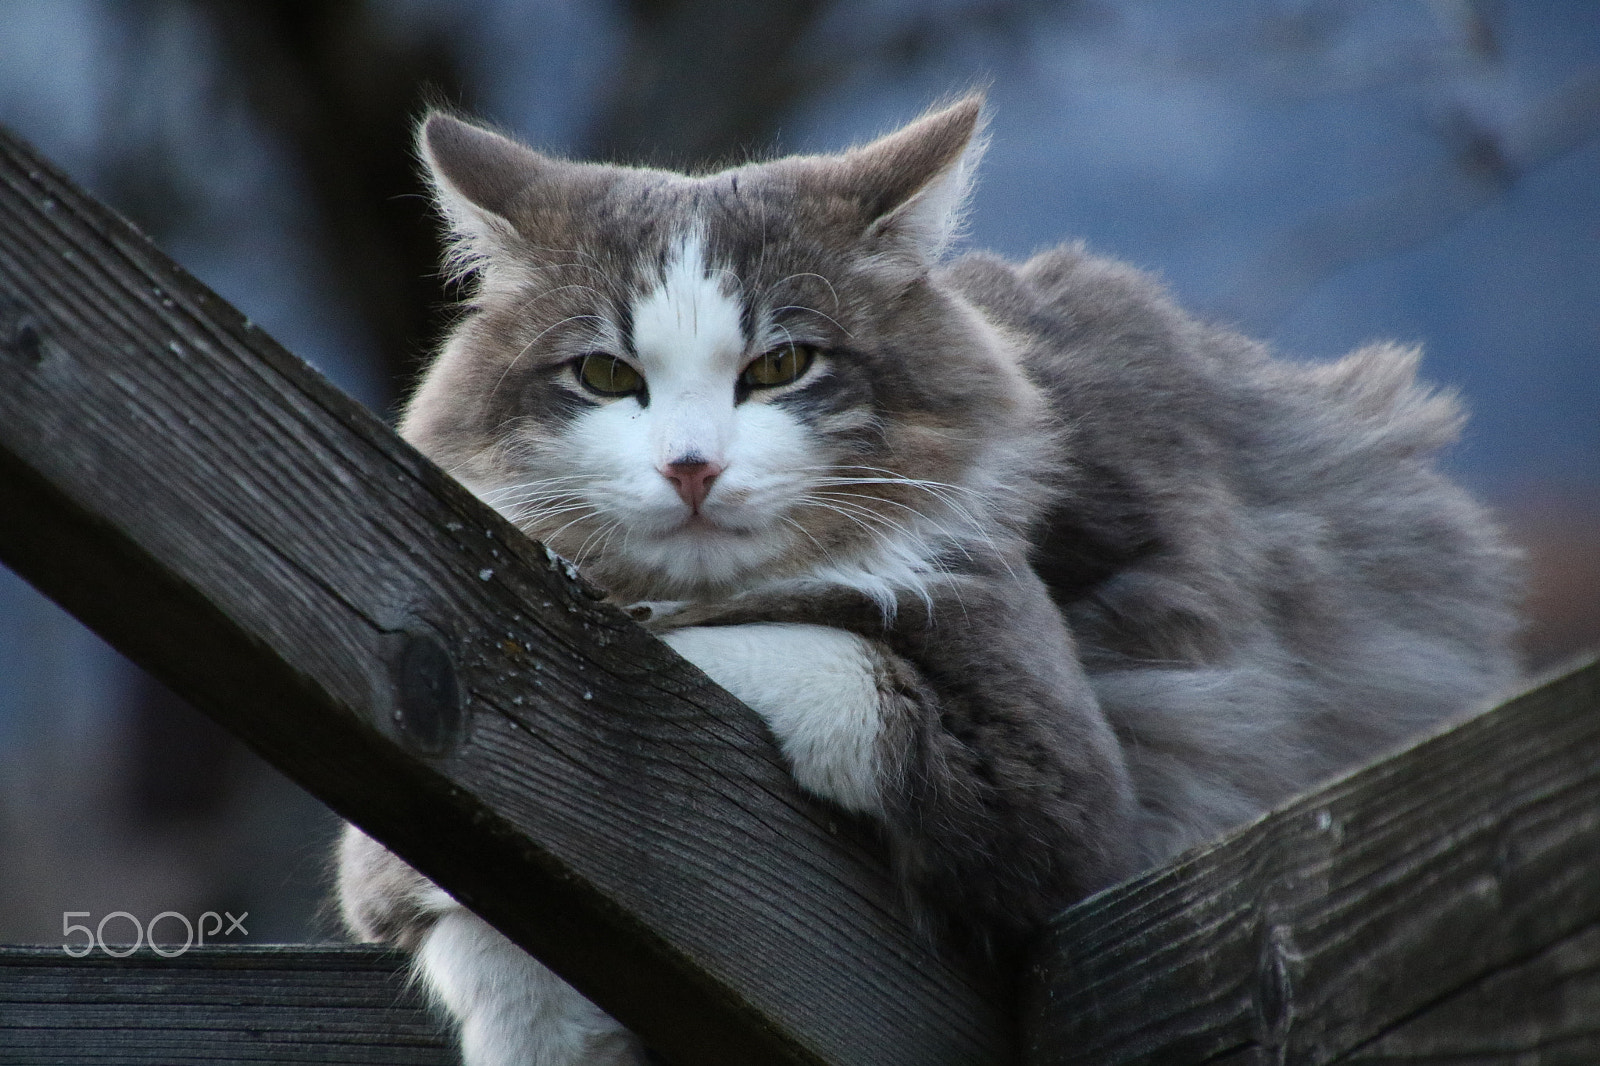 Canon EOS 7D Mark II + Canon TAMRON 16-300mm F/3.5-6.3 Di II VC PZD B016 sample photo. Relaxing cat photography